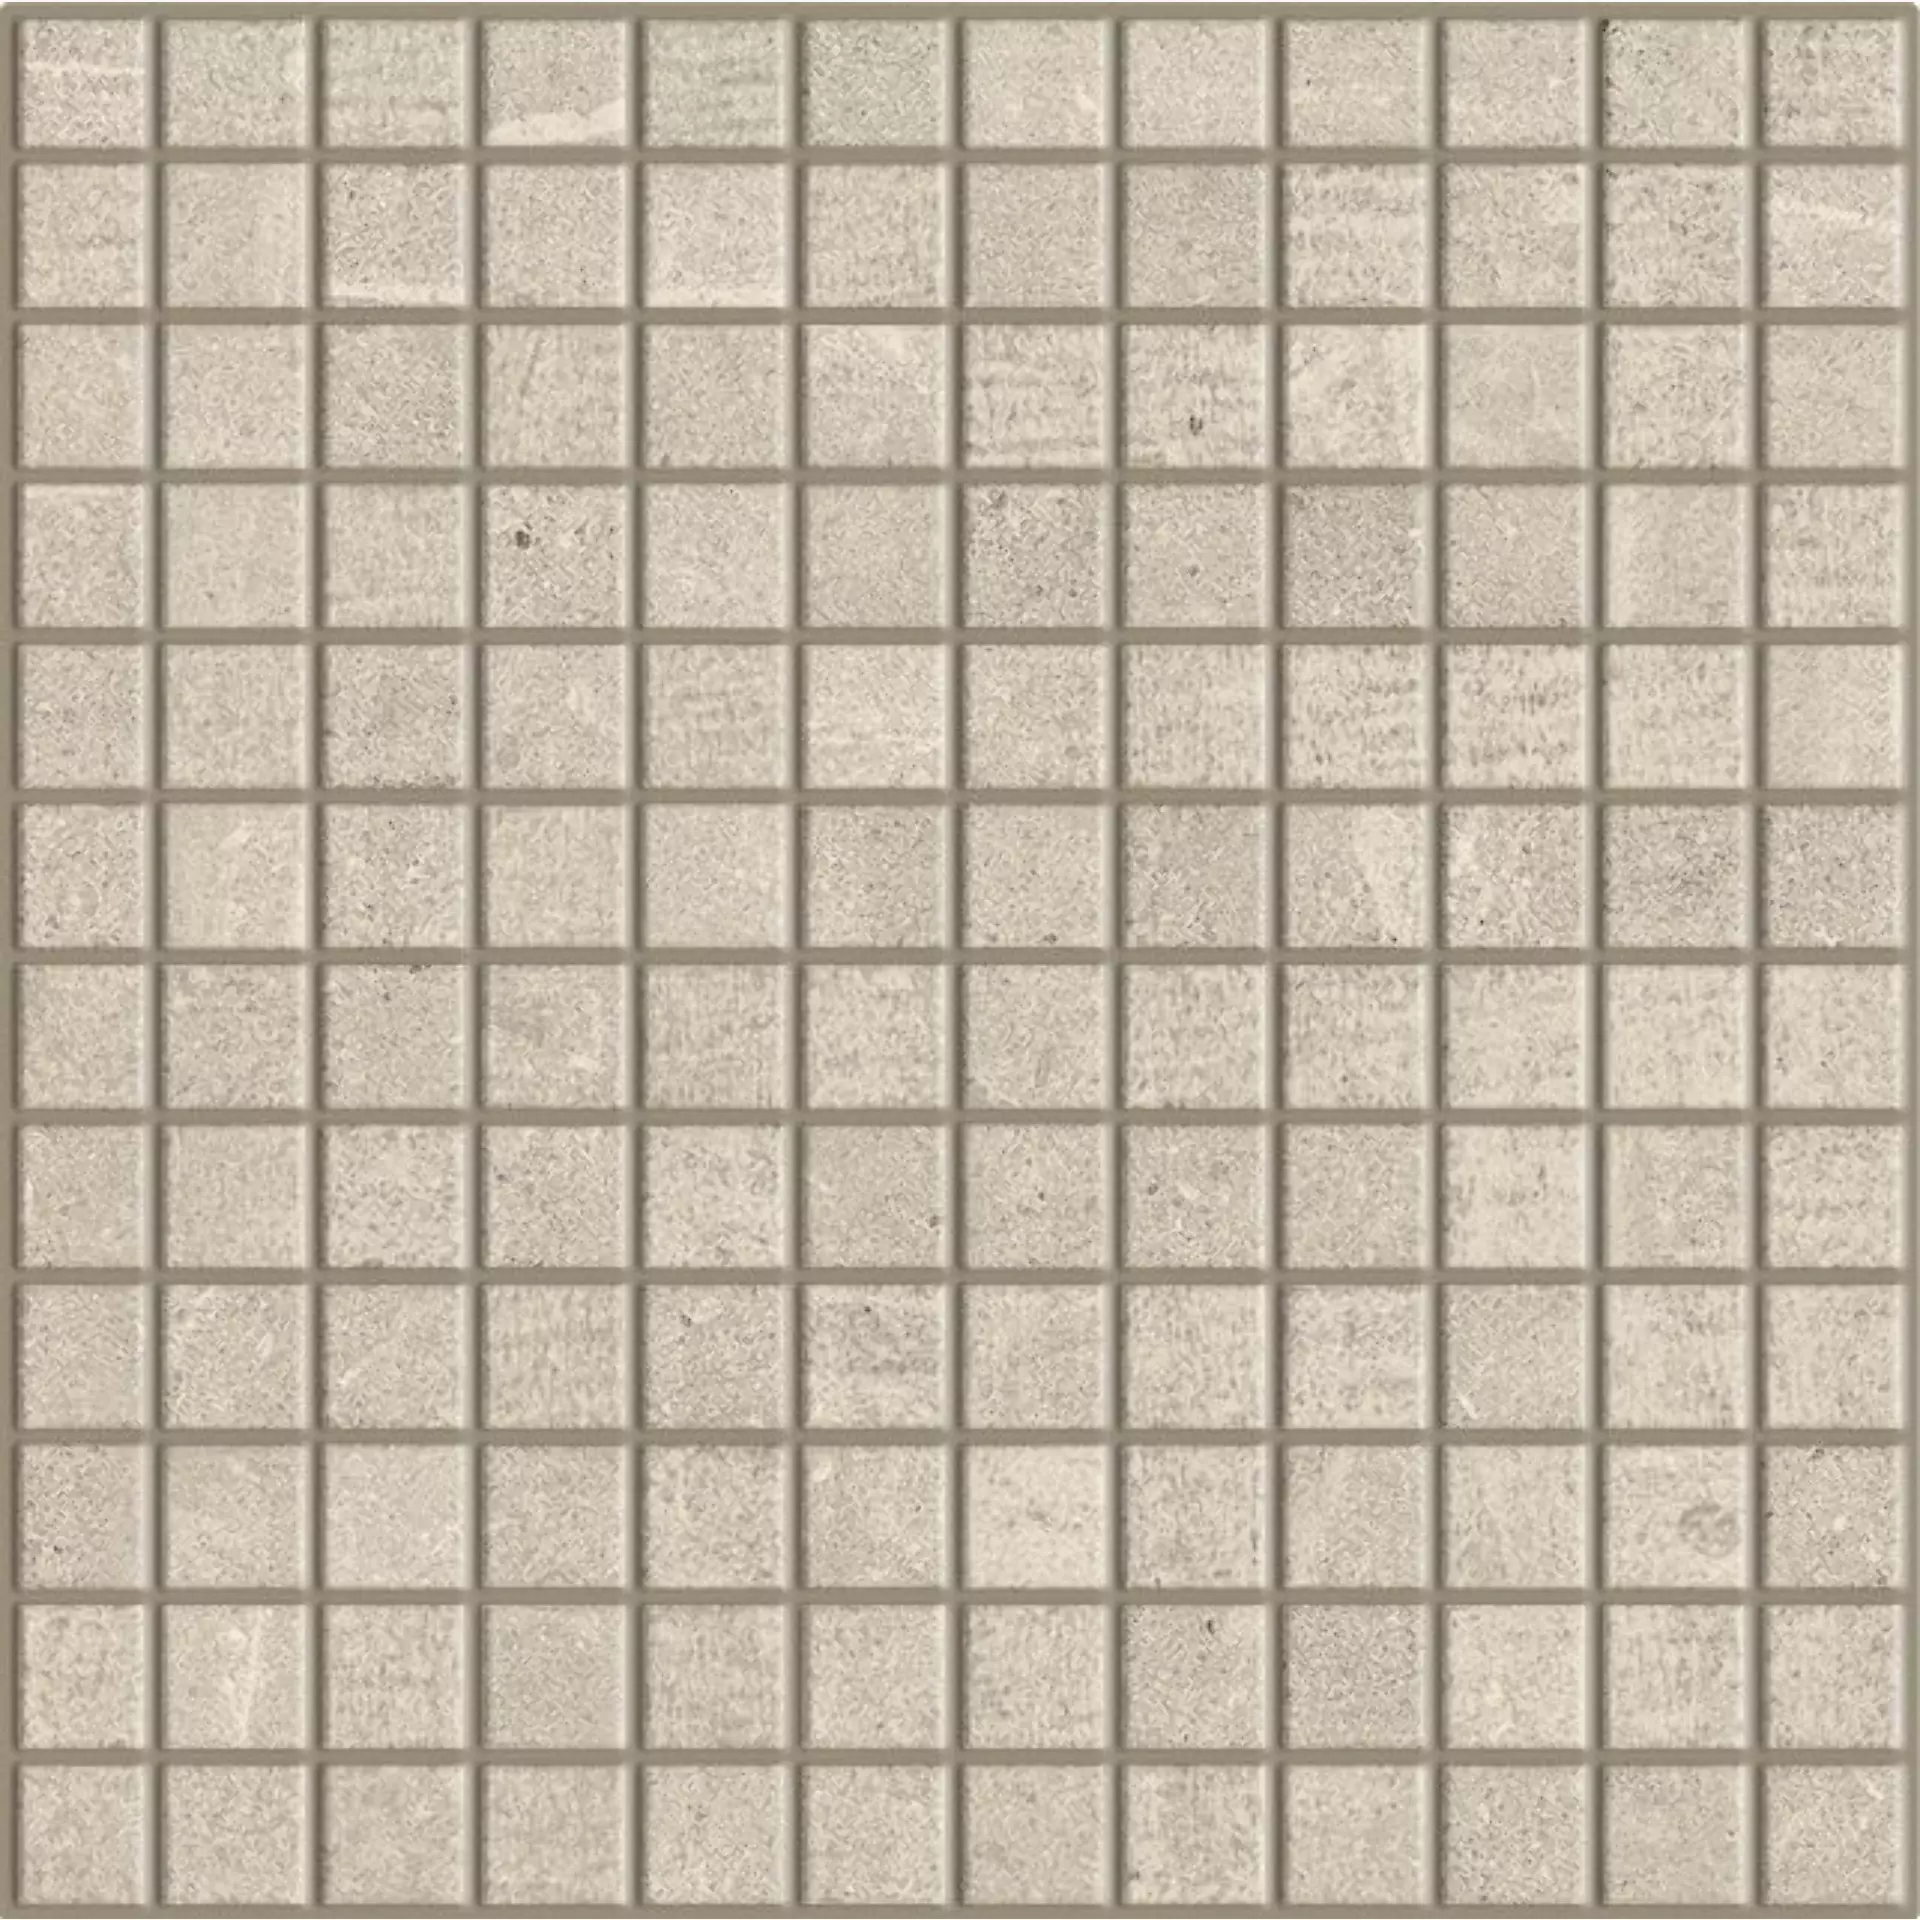 Century Uptown Morningside Naturale Mosaic (2,5x2,5) 0095622 30x30cm rectified 9mm